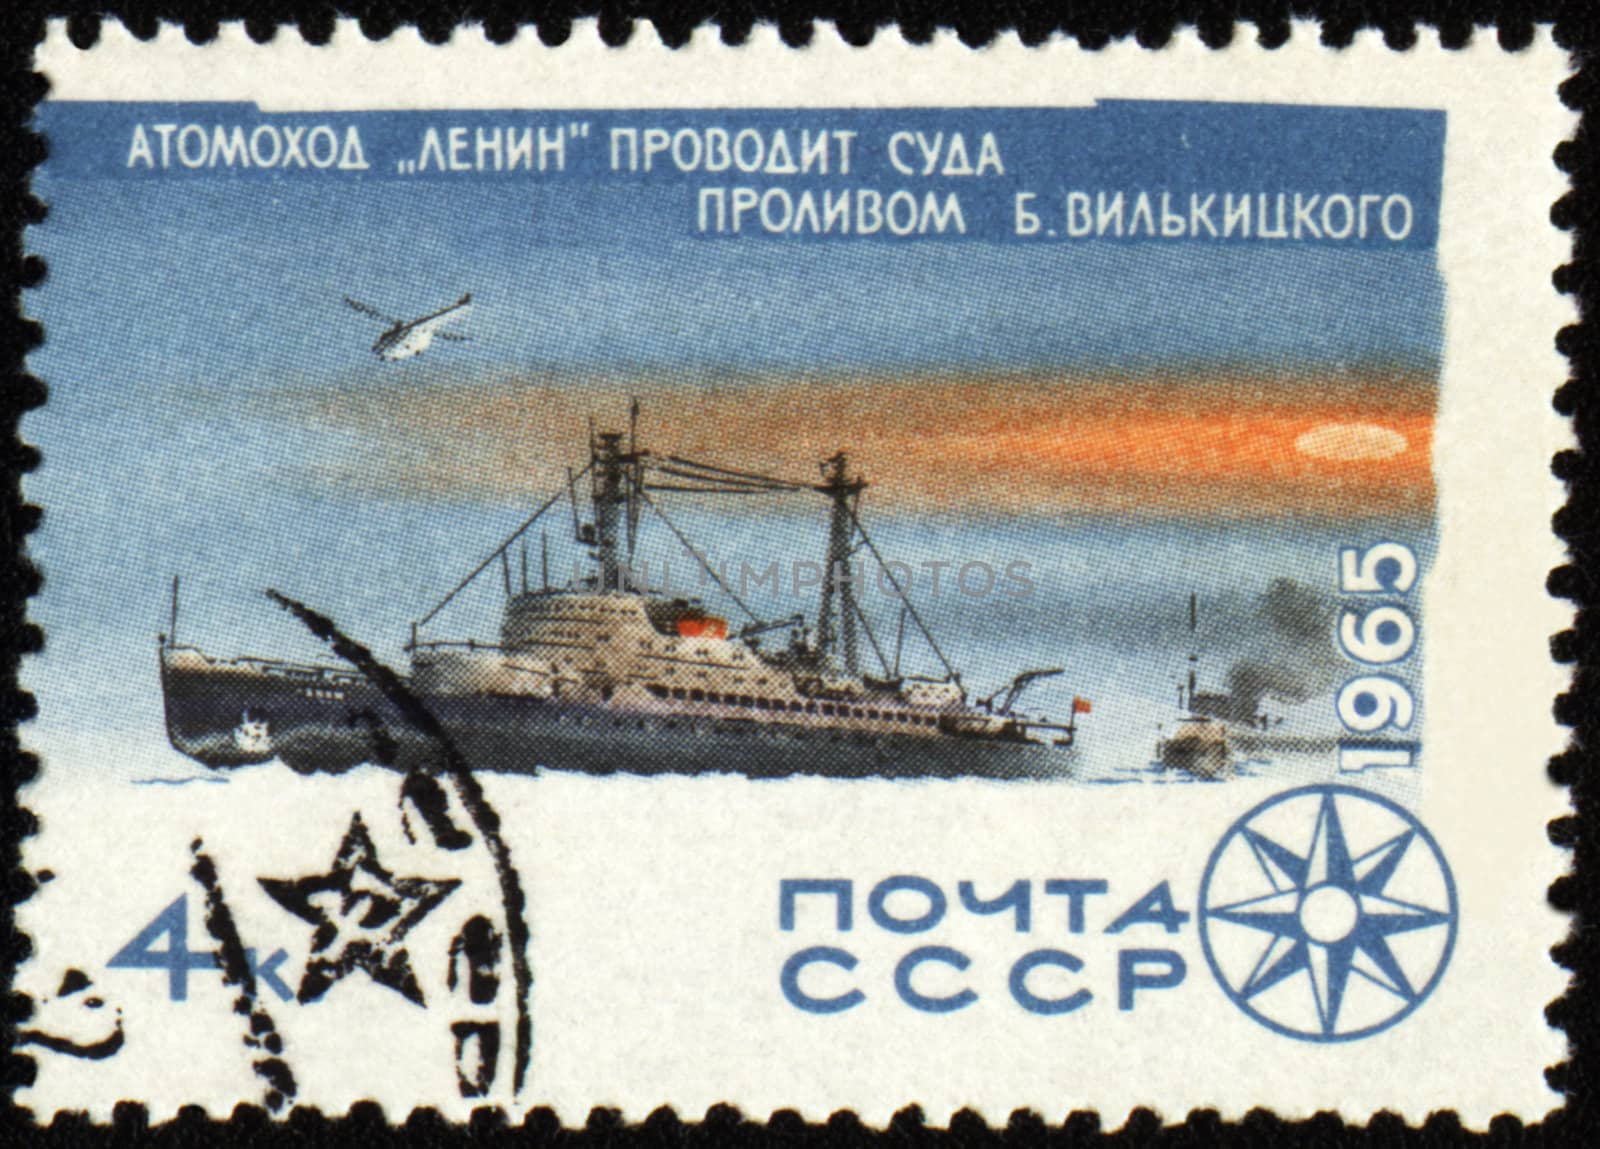 USSR - CIRCA 1965: stamp printed in USSR, shows nuclear-powered icebreaker Lenin in Arctic, series, circa 1965